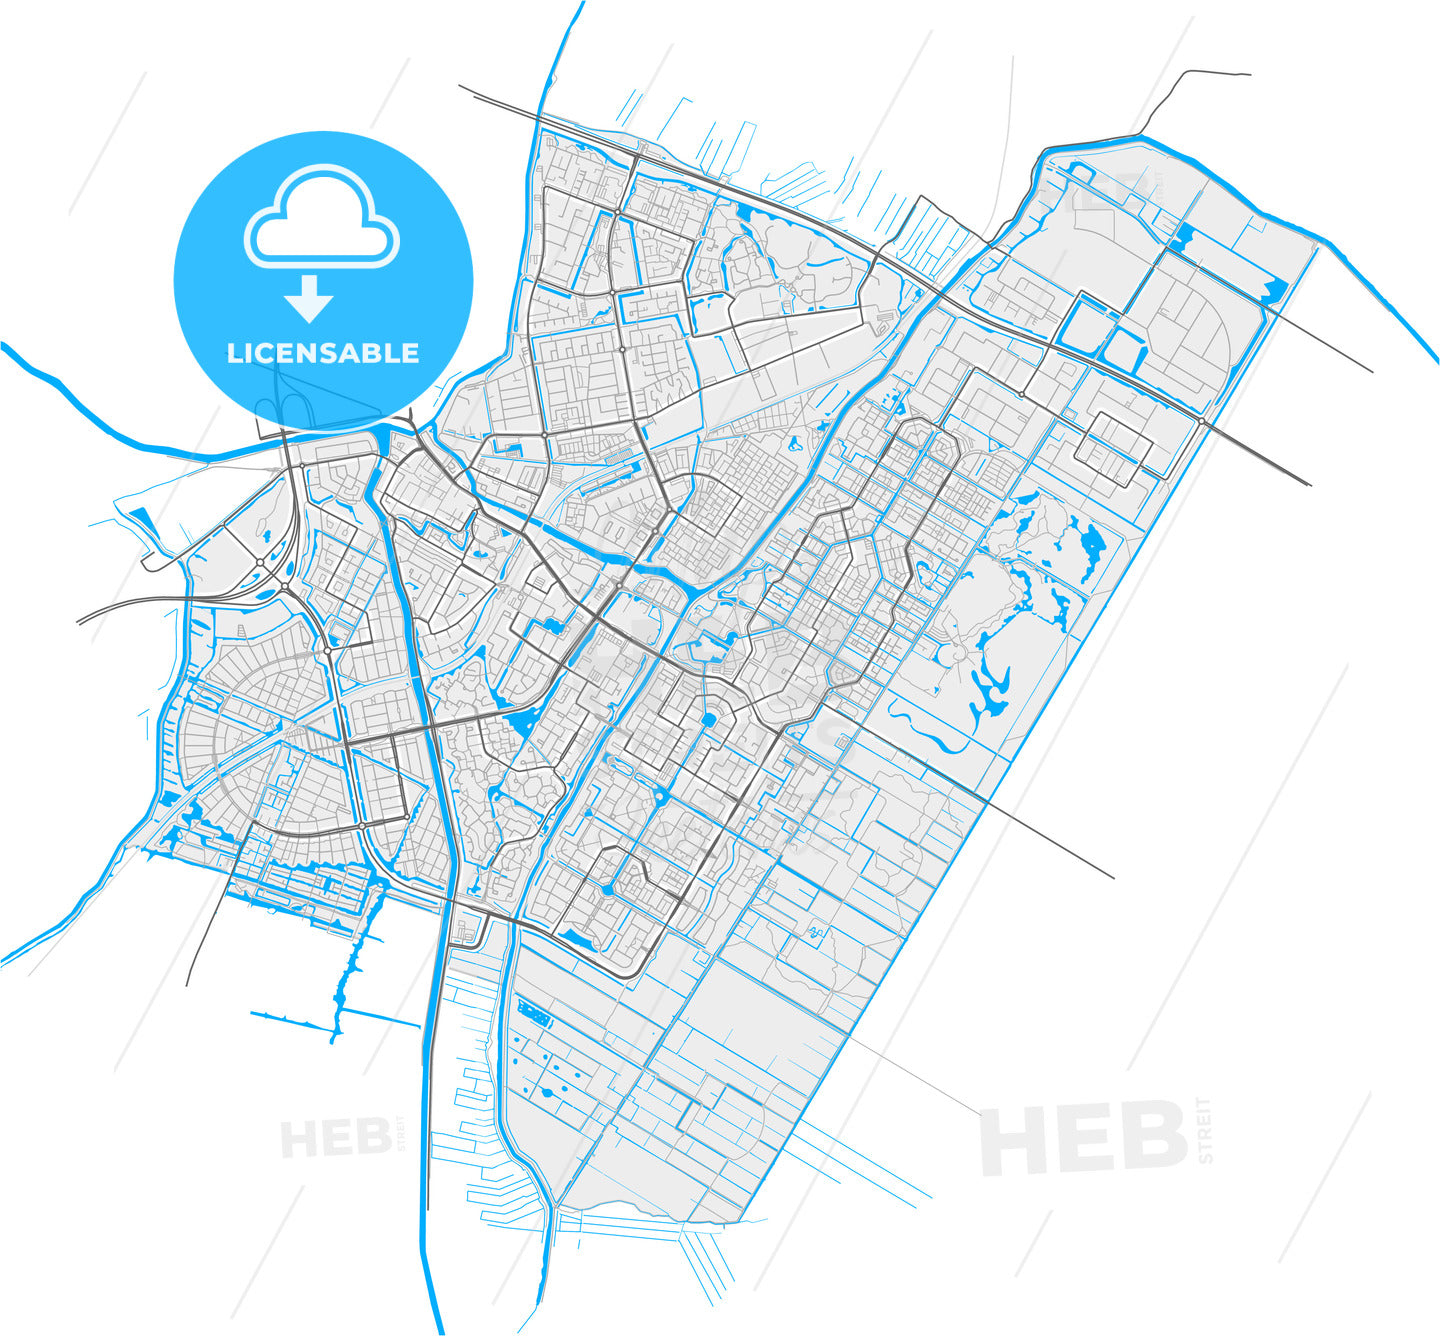 Purmerend, North Holland, Netherlands, high quality vector map